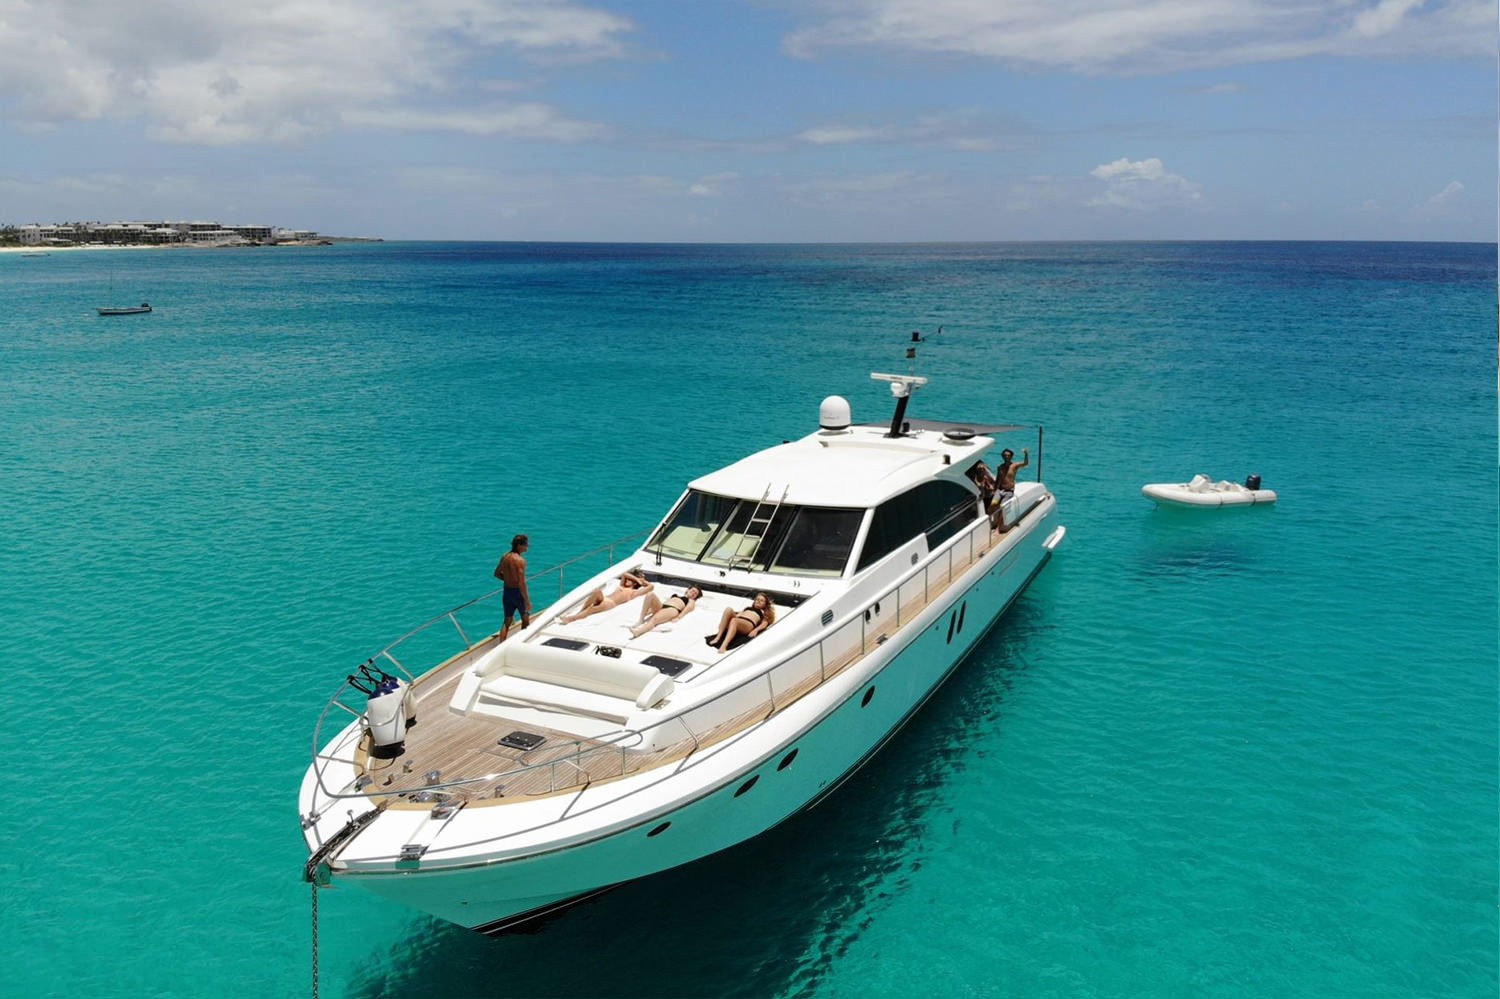 The Couach 71 is an elegantly designed yacht, with clean lines.